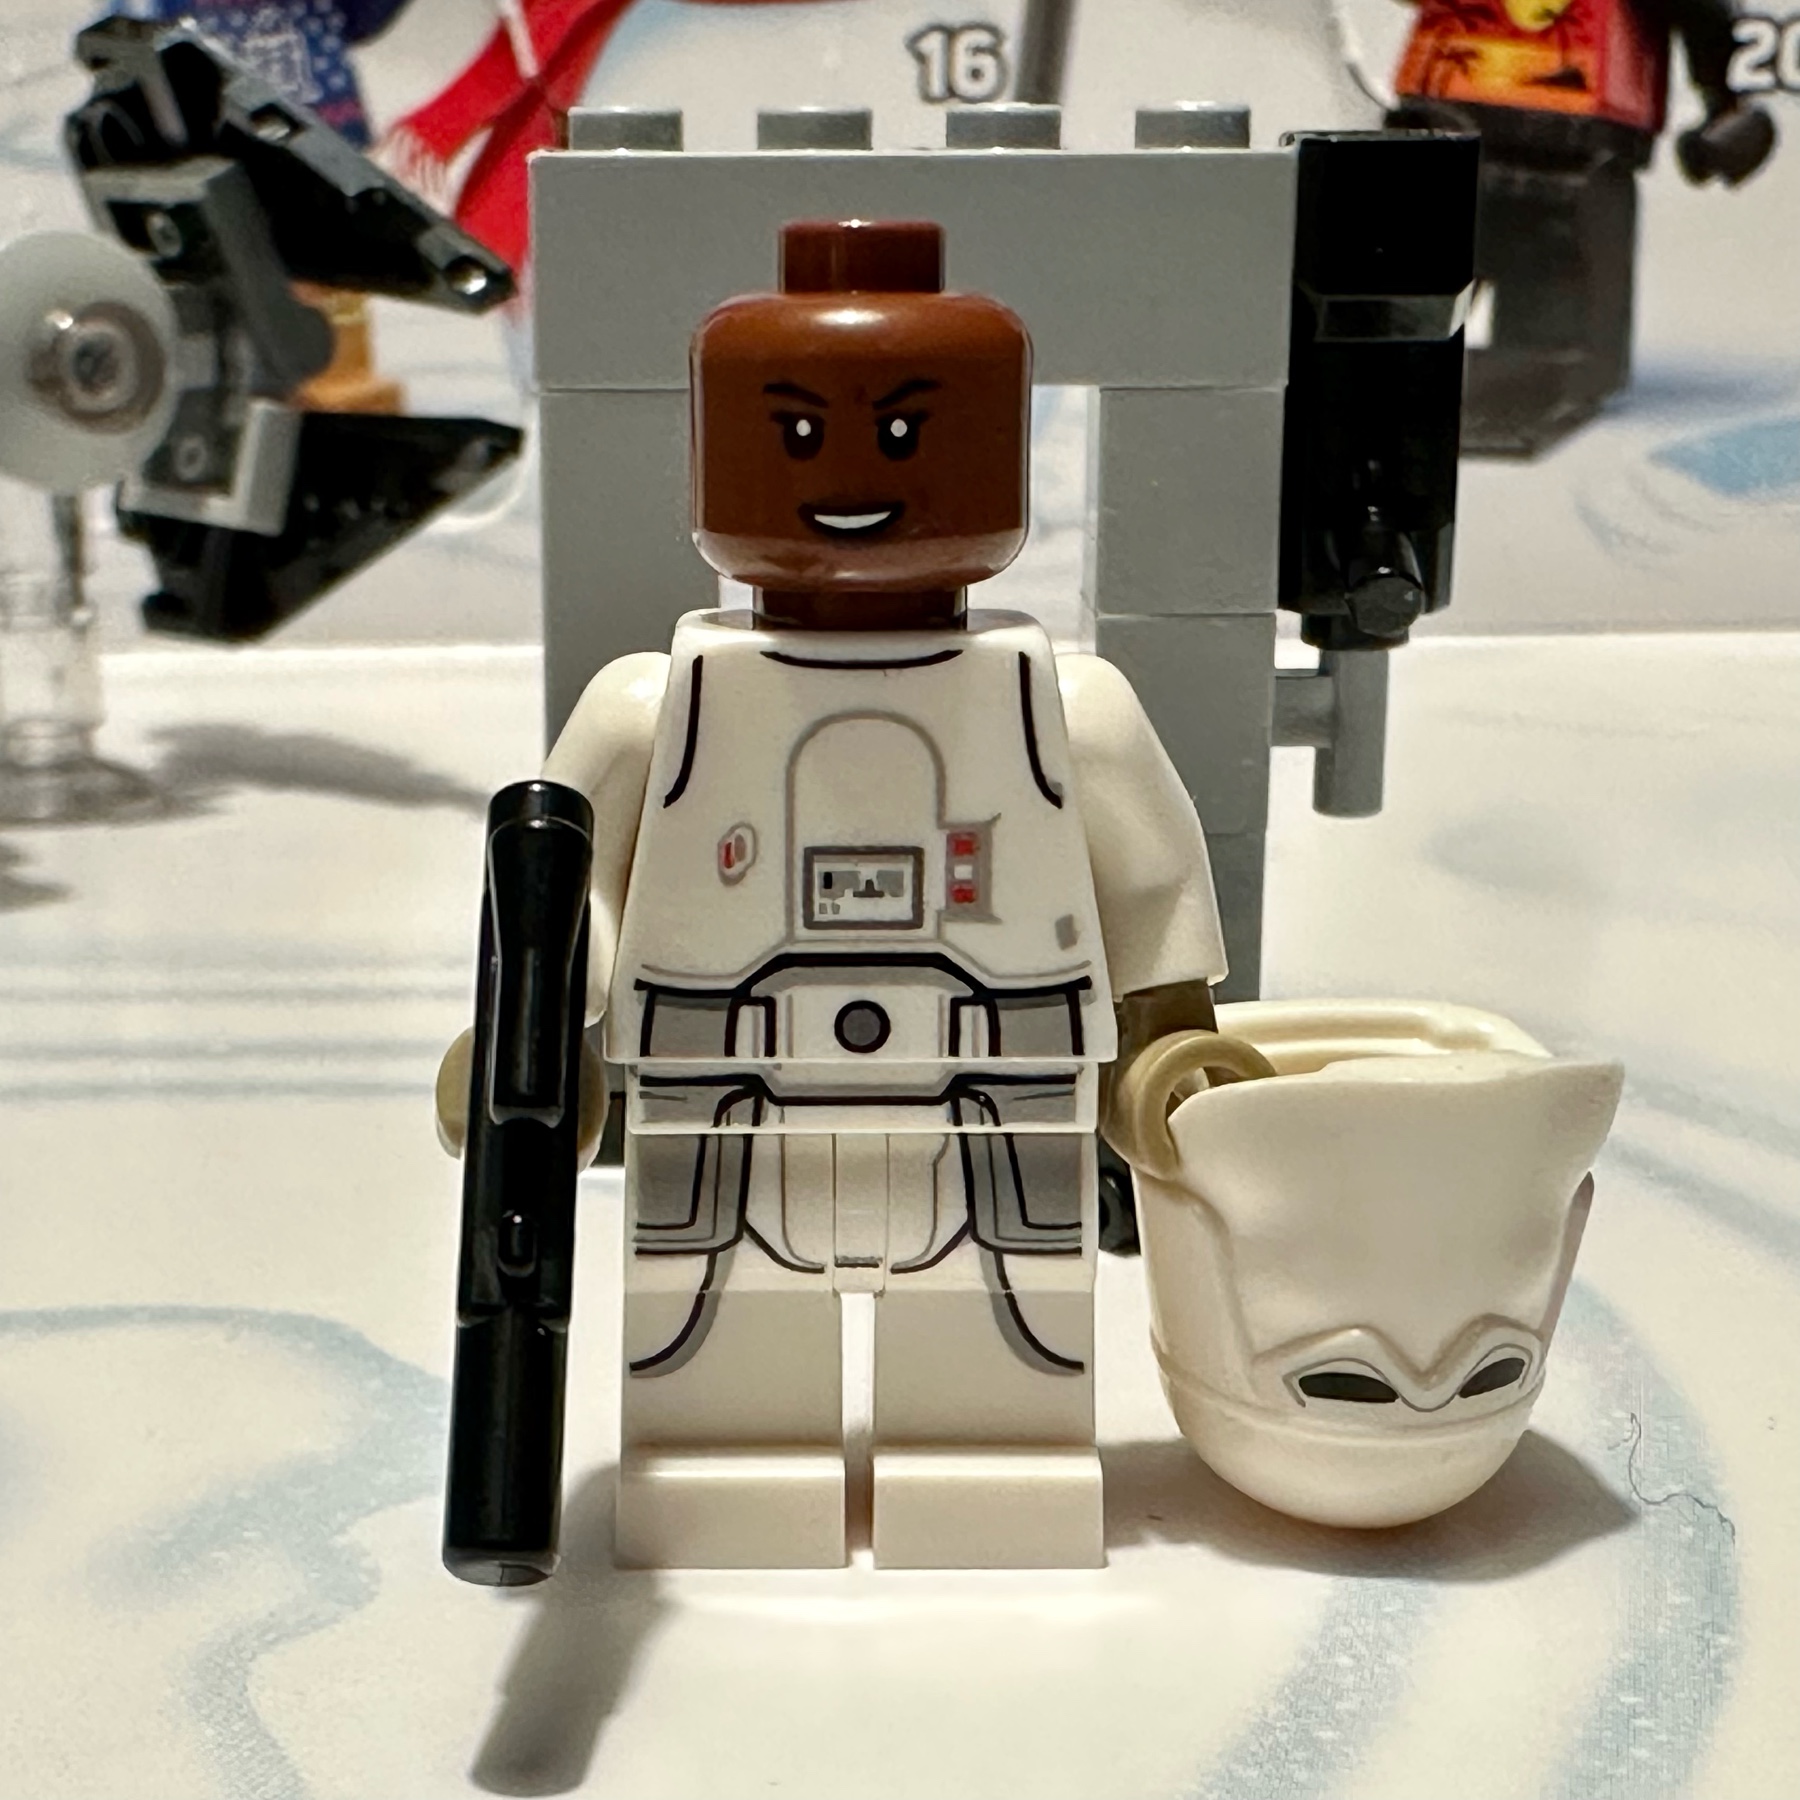 LEGO minifigure of a black woman in snowtrooper uniform holding a blaster in one hand and her helmet in the other